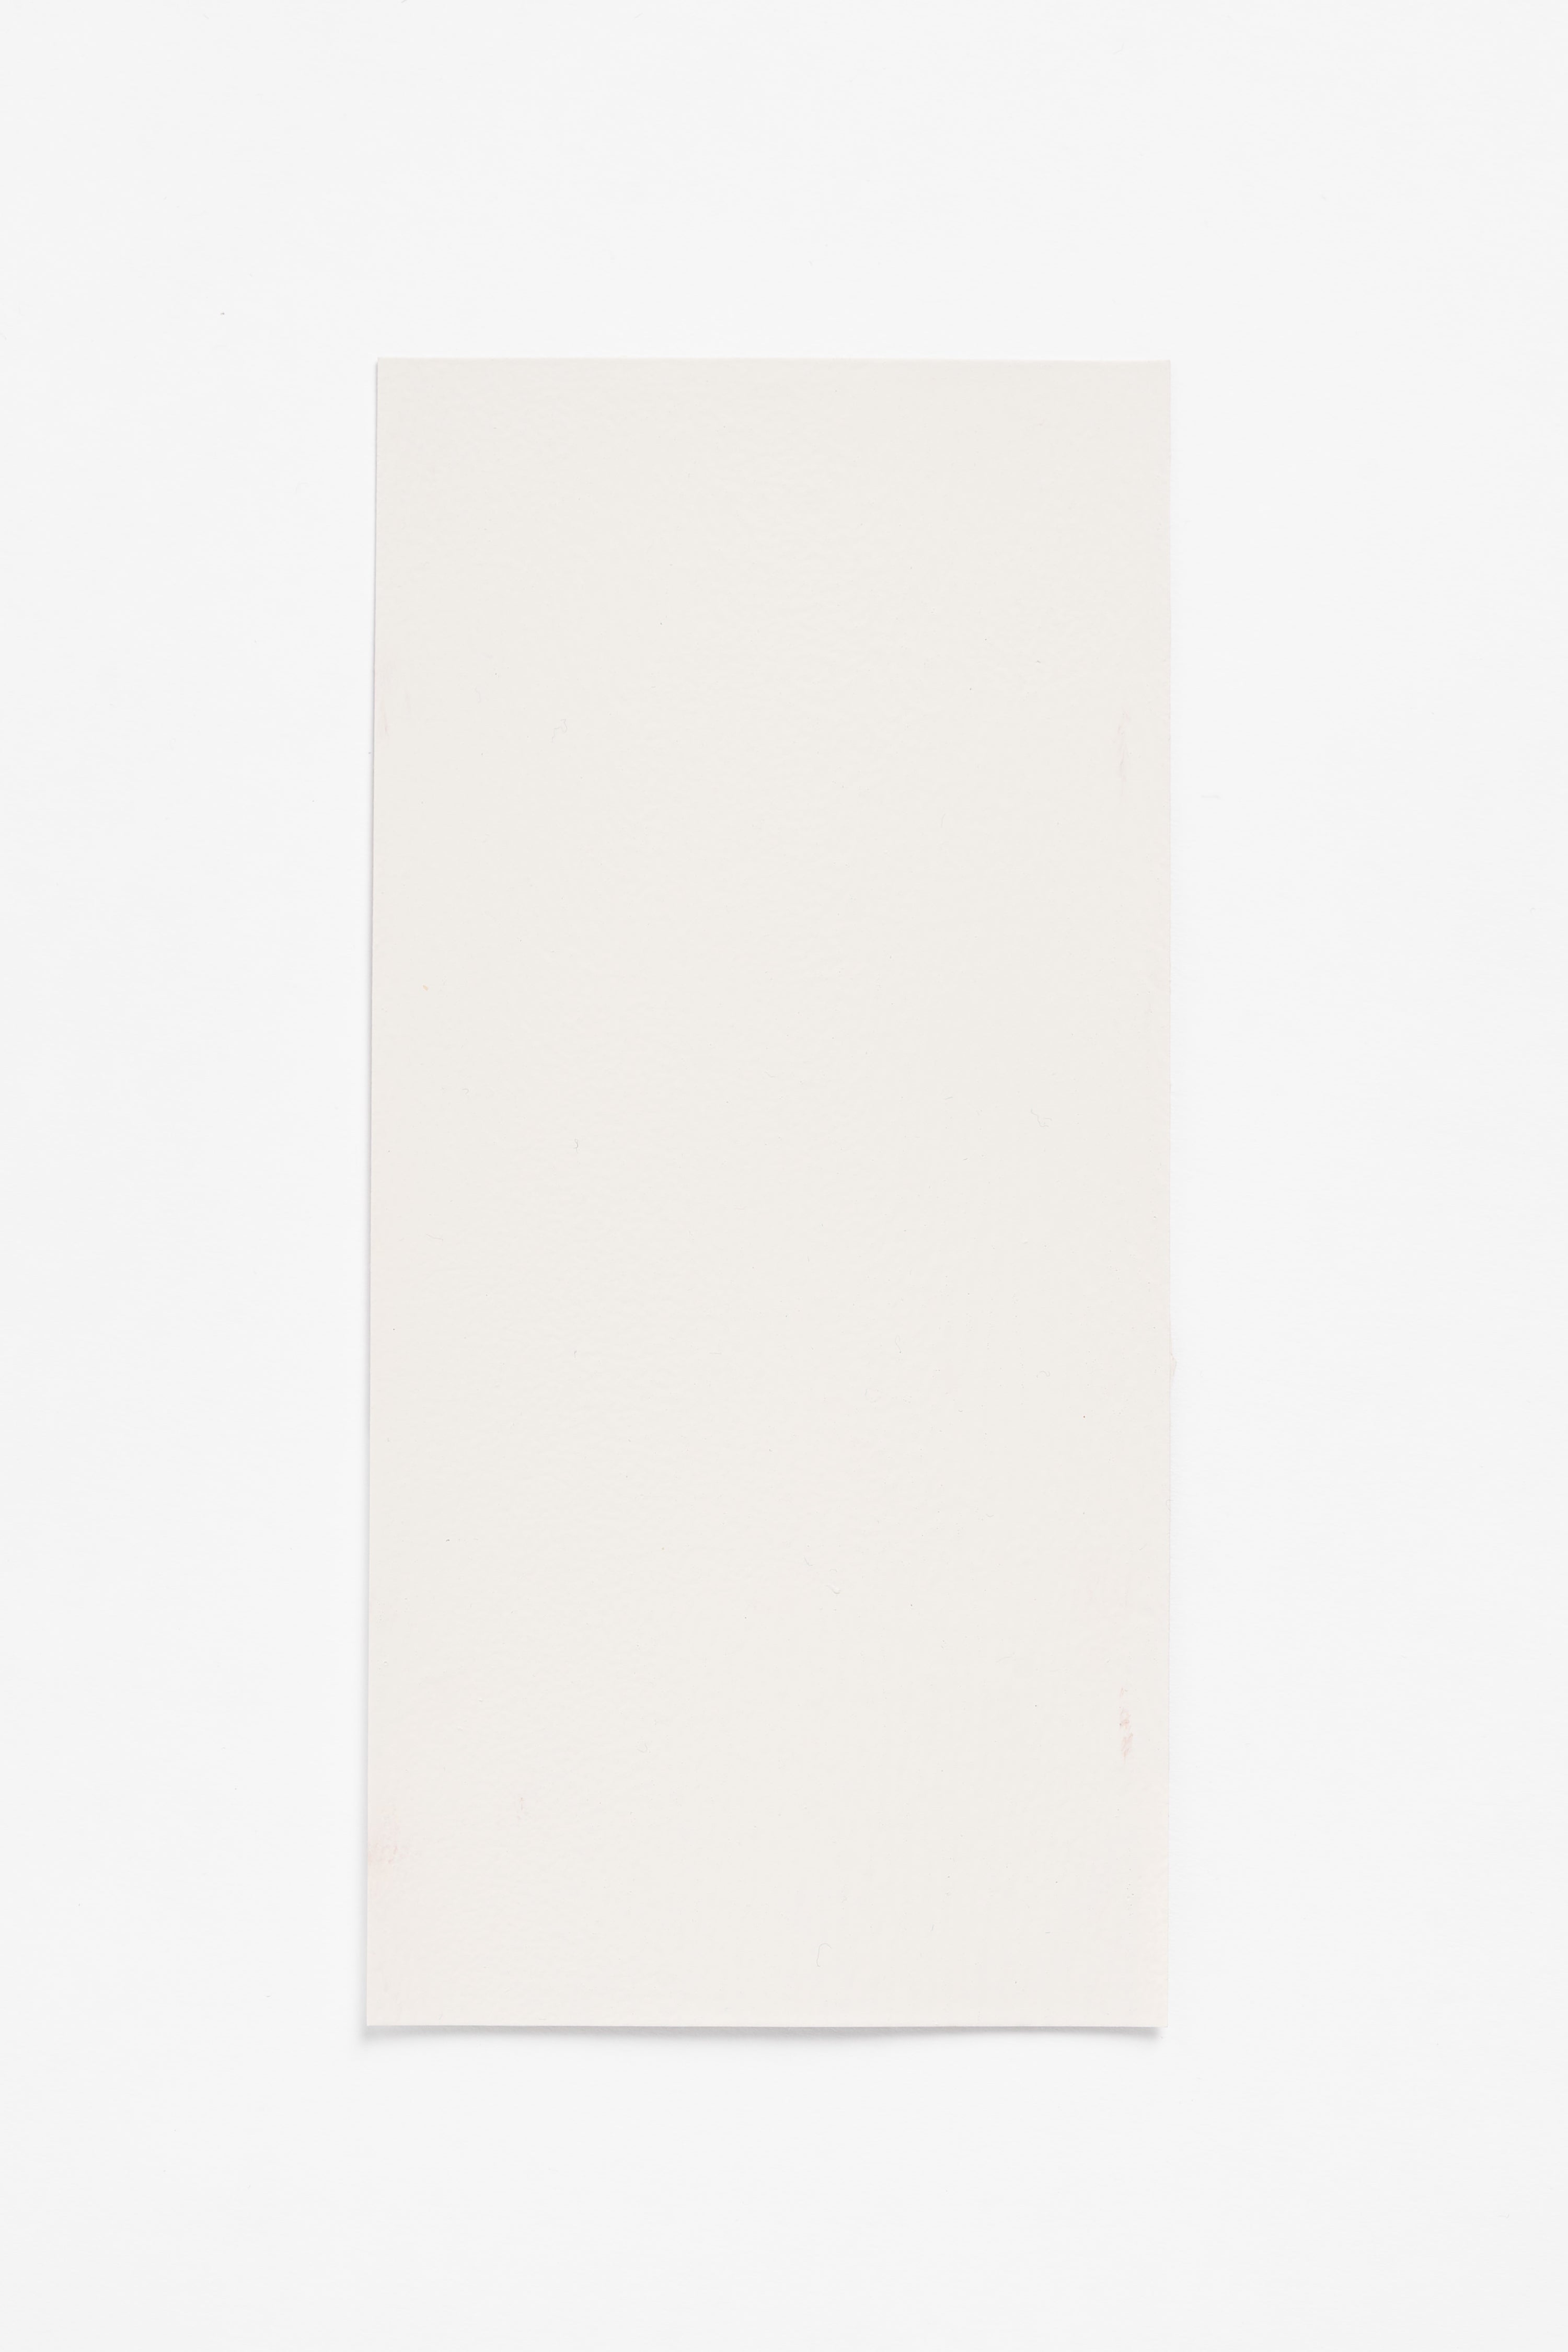 Silver Birch — a paint colour developed by John Pawson for Blēo